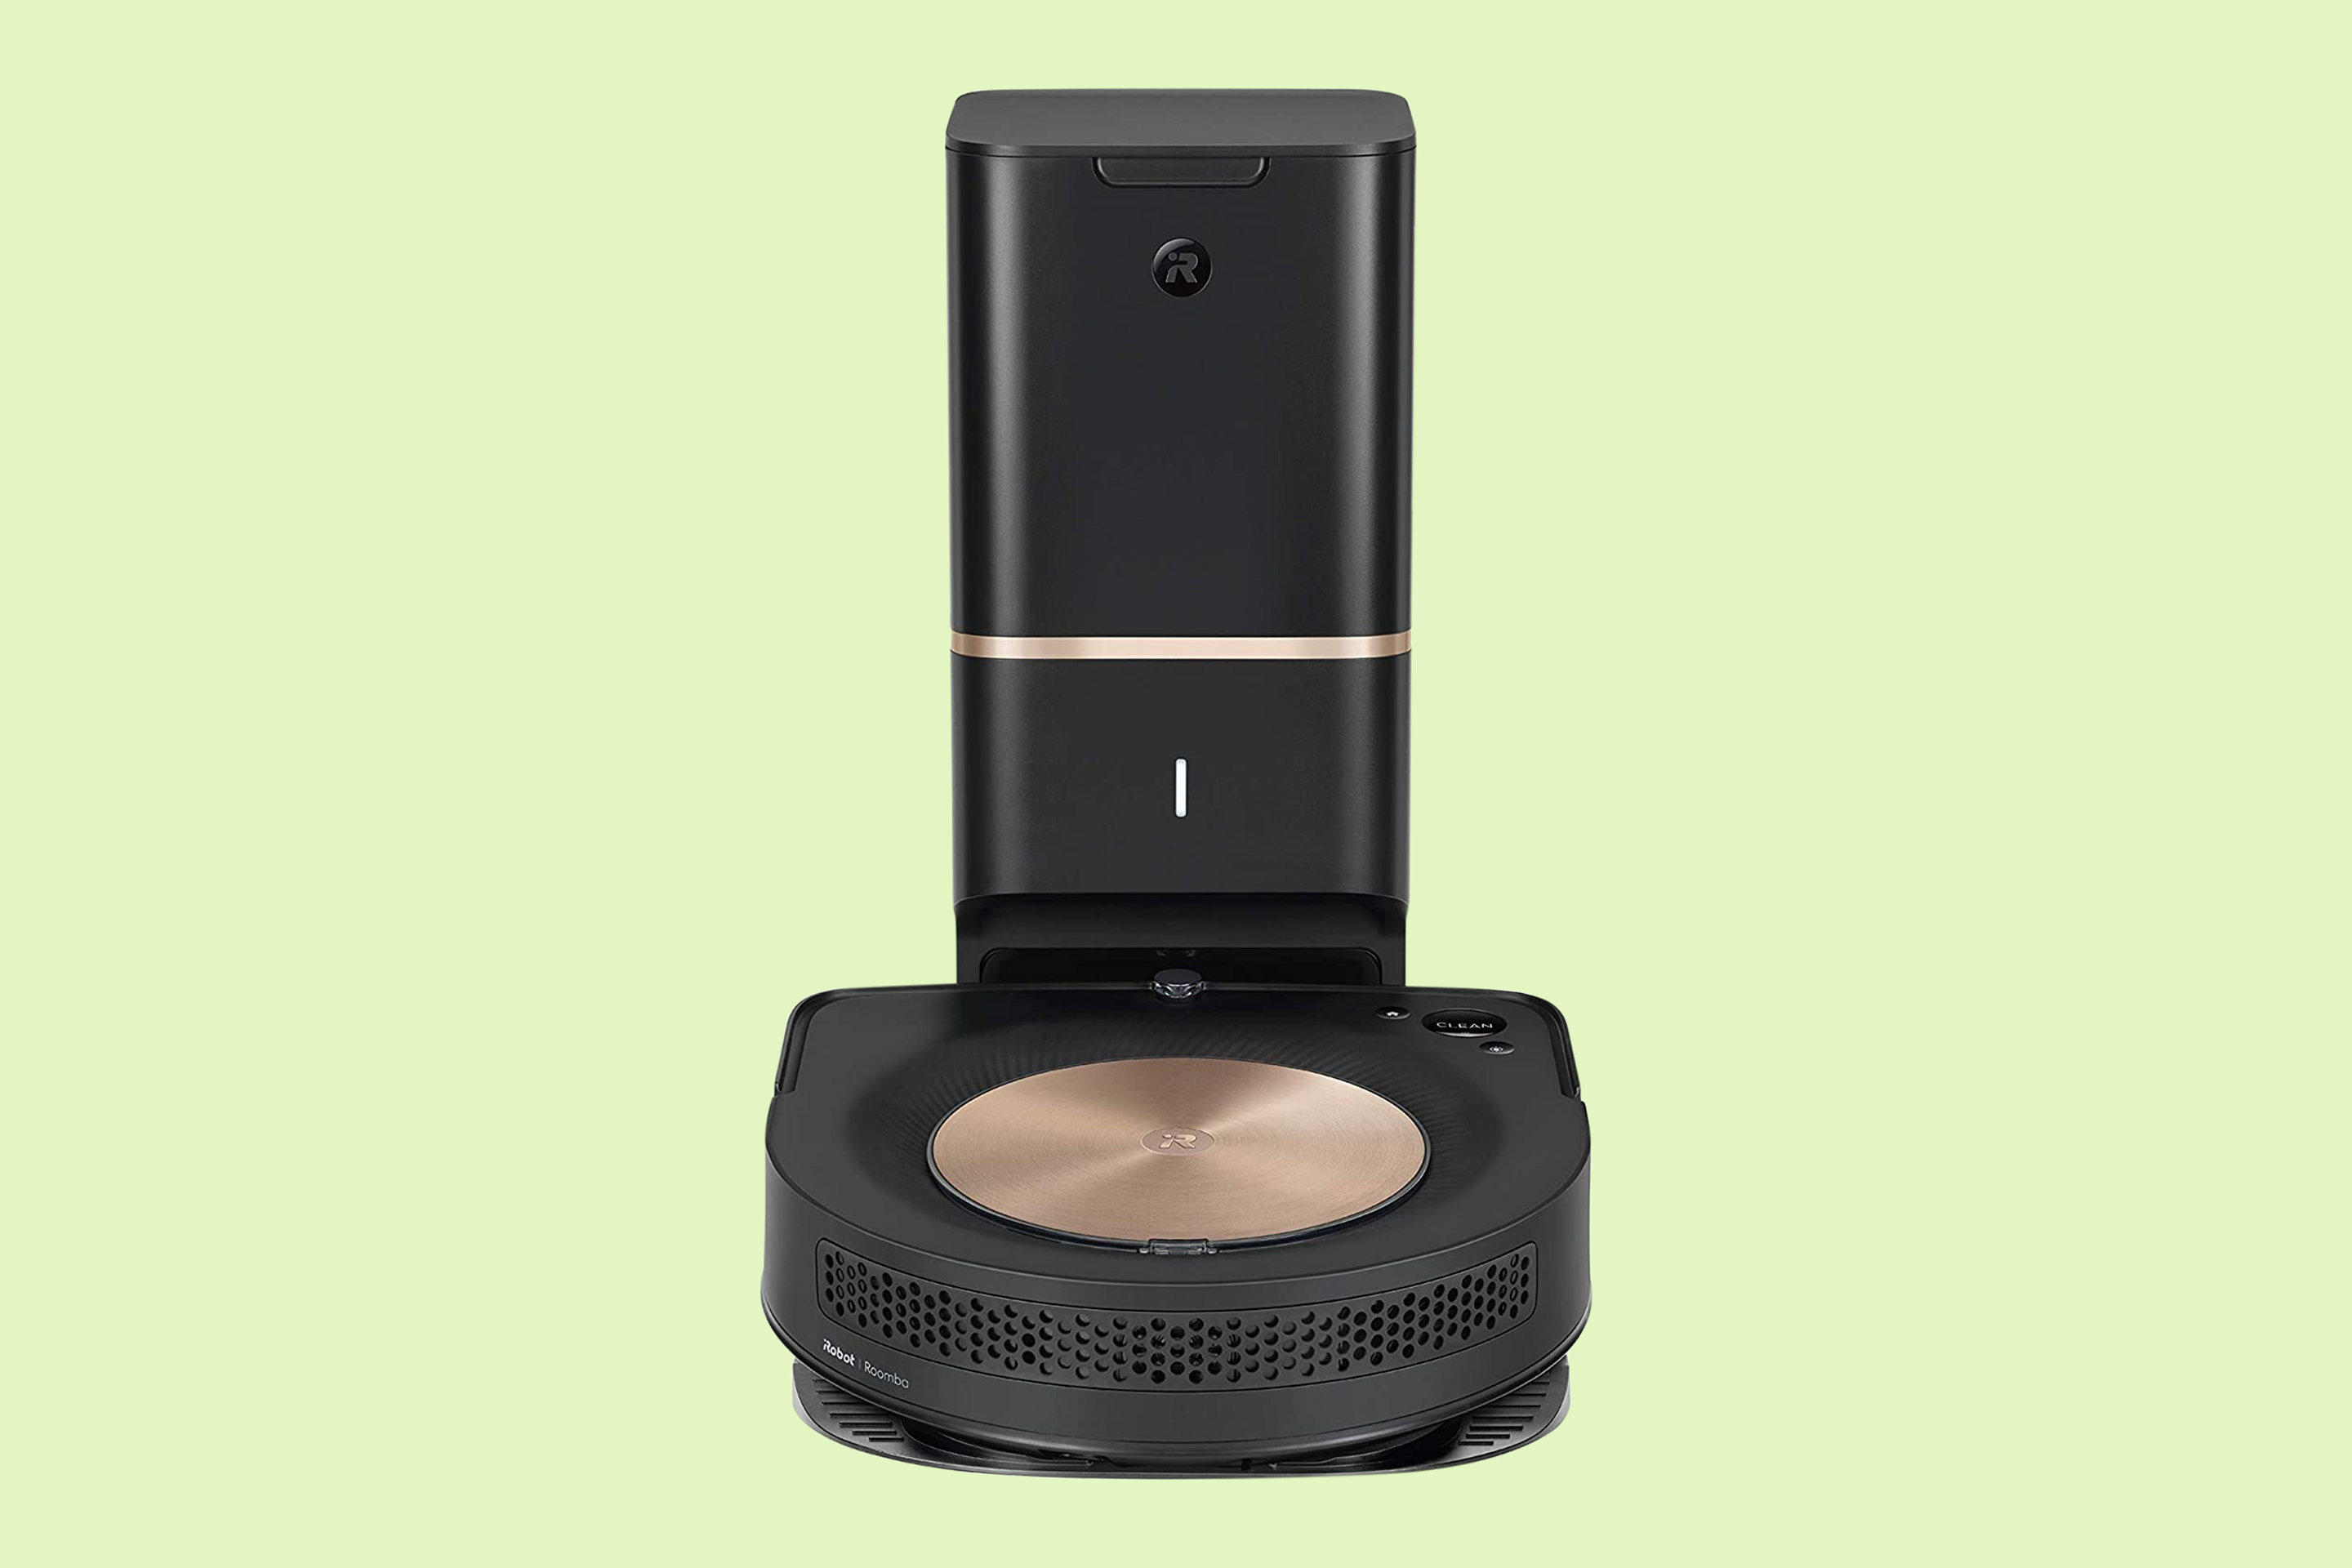 Black and Copper-colored iRobot s9+ with docking station